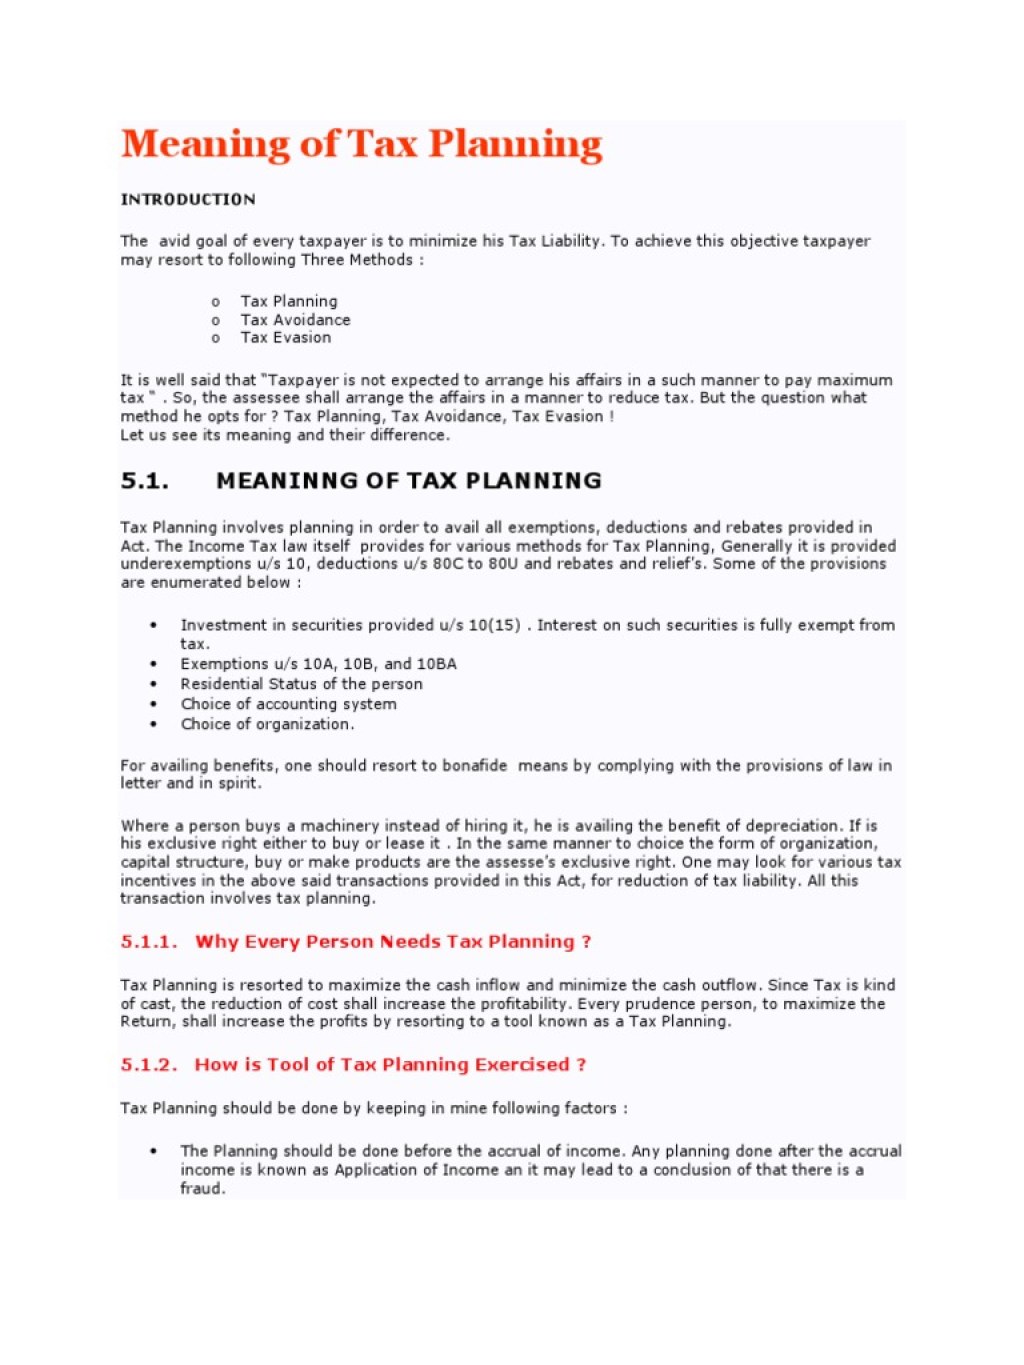 Picture of: Meaning of Tax Planning  PDF  Tax Evasion  Tax Avoidance